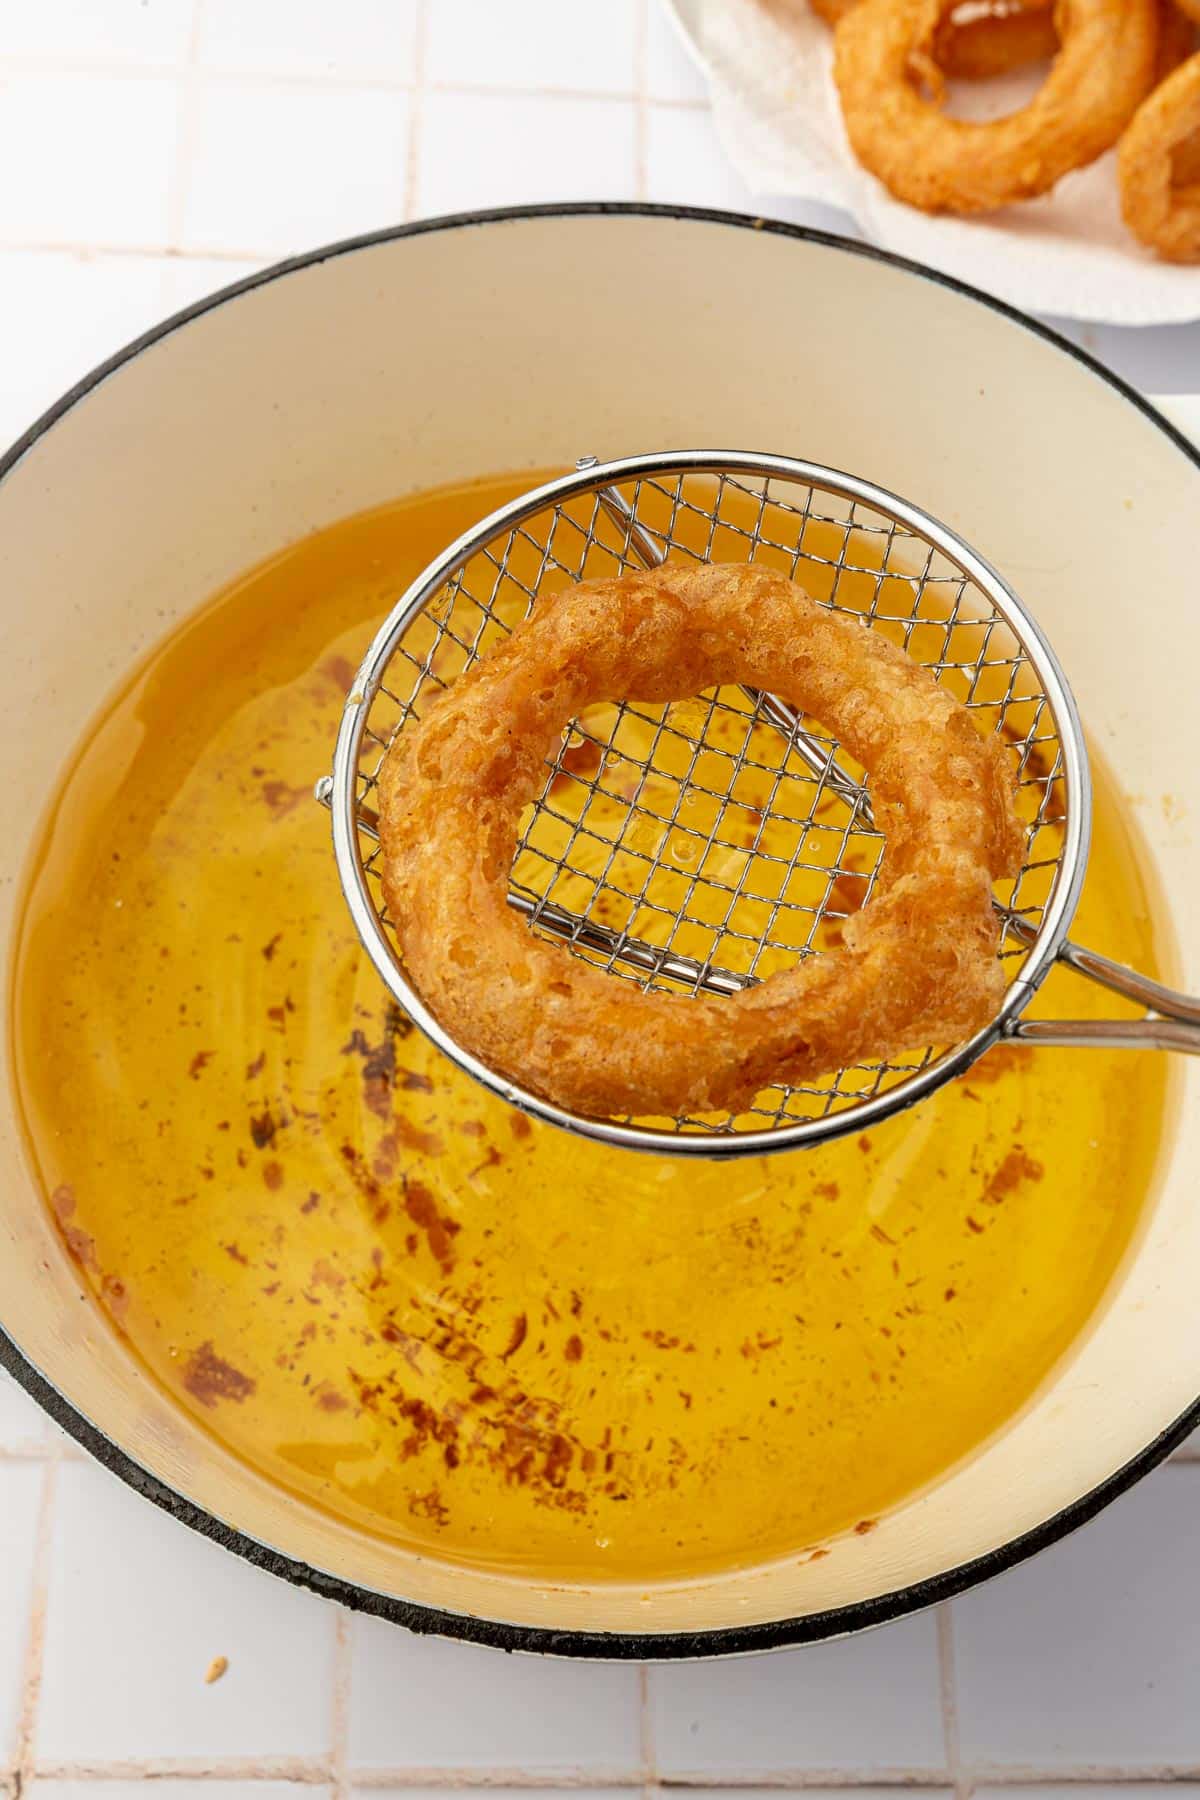 A wire spider spatula removing a gluten free onion ring from a pot of hot oil.